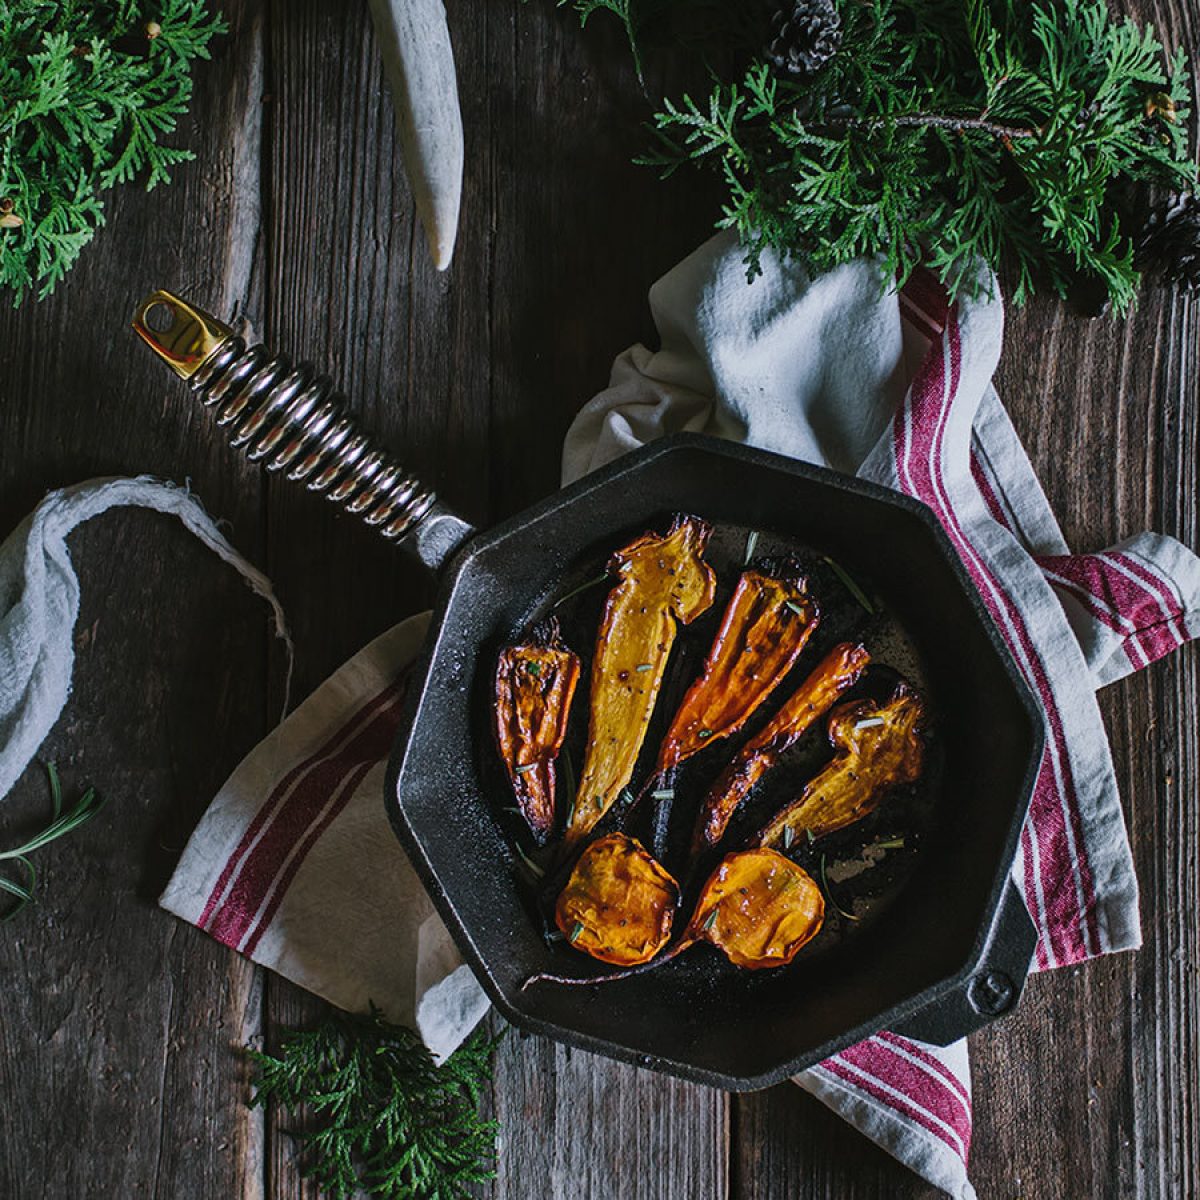 Cast Iron Set | Includes Full-Sized and Tiny Cast Iron Always Pan, Hot Grips & Grill Press | Heirloom-Quality Enamled Cast Iron | Limited Time Bundle